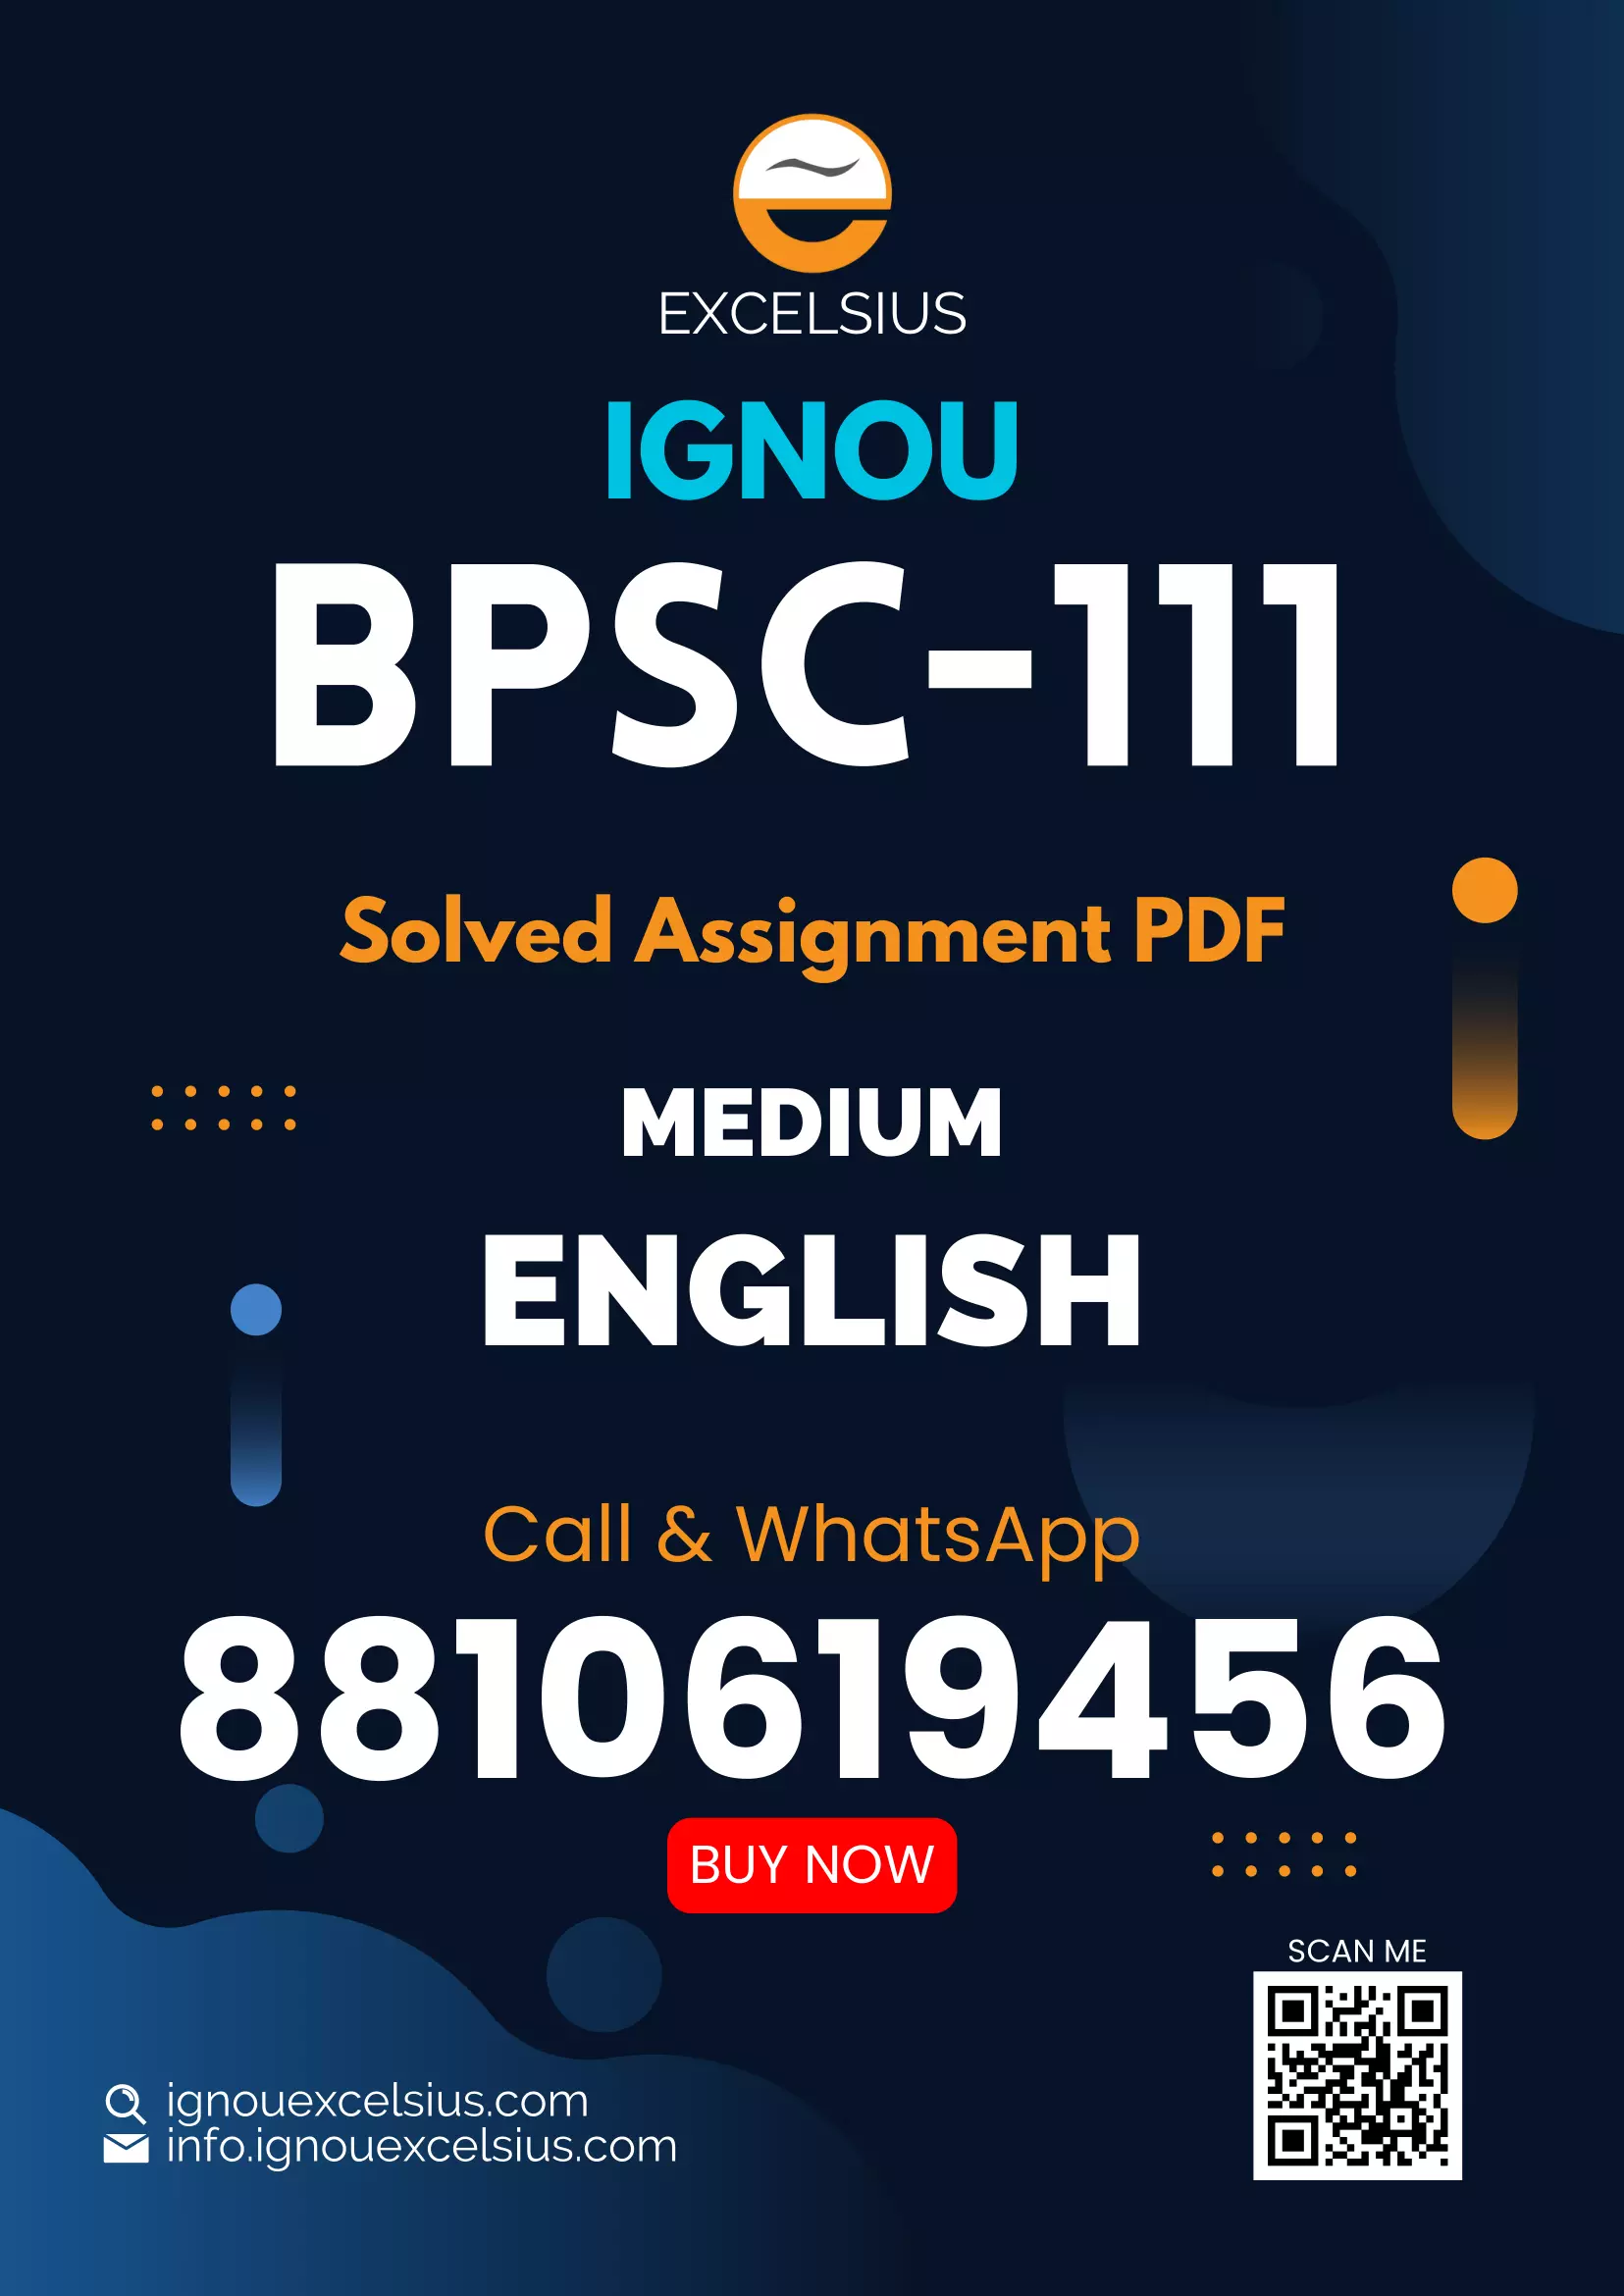 IGNOU BPSC-111 - Classical Political Philosophy, Latest Solved Assignment-July 2022 – January 2023